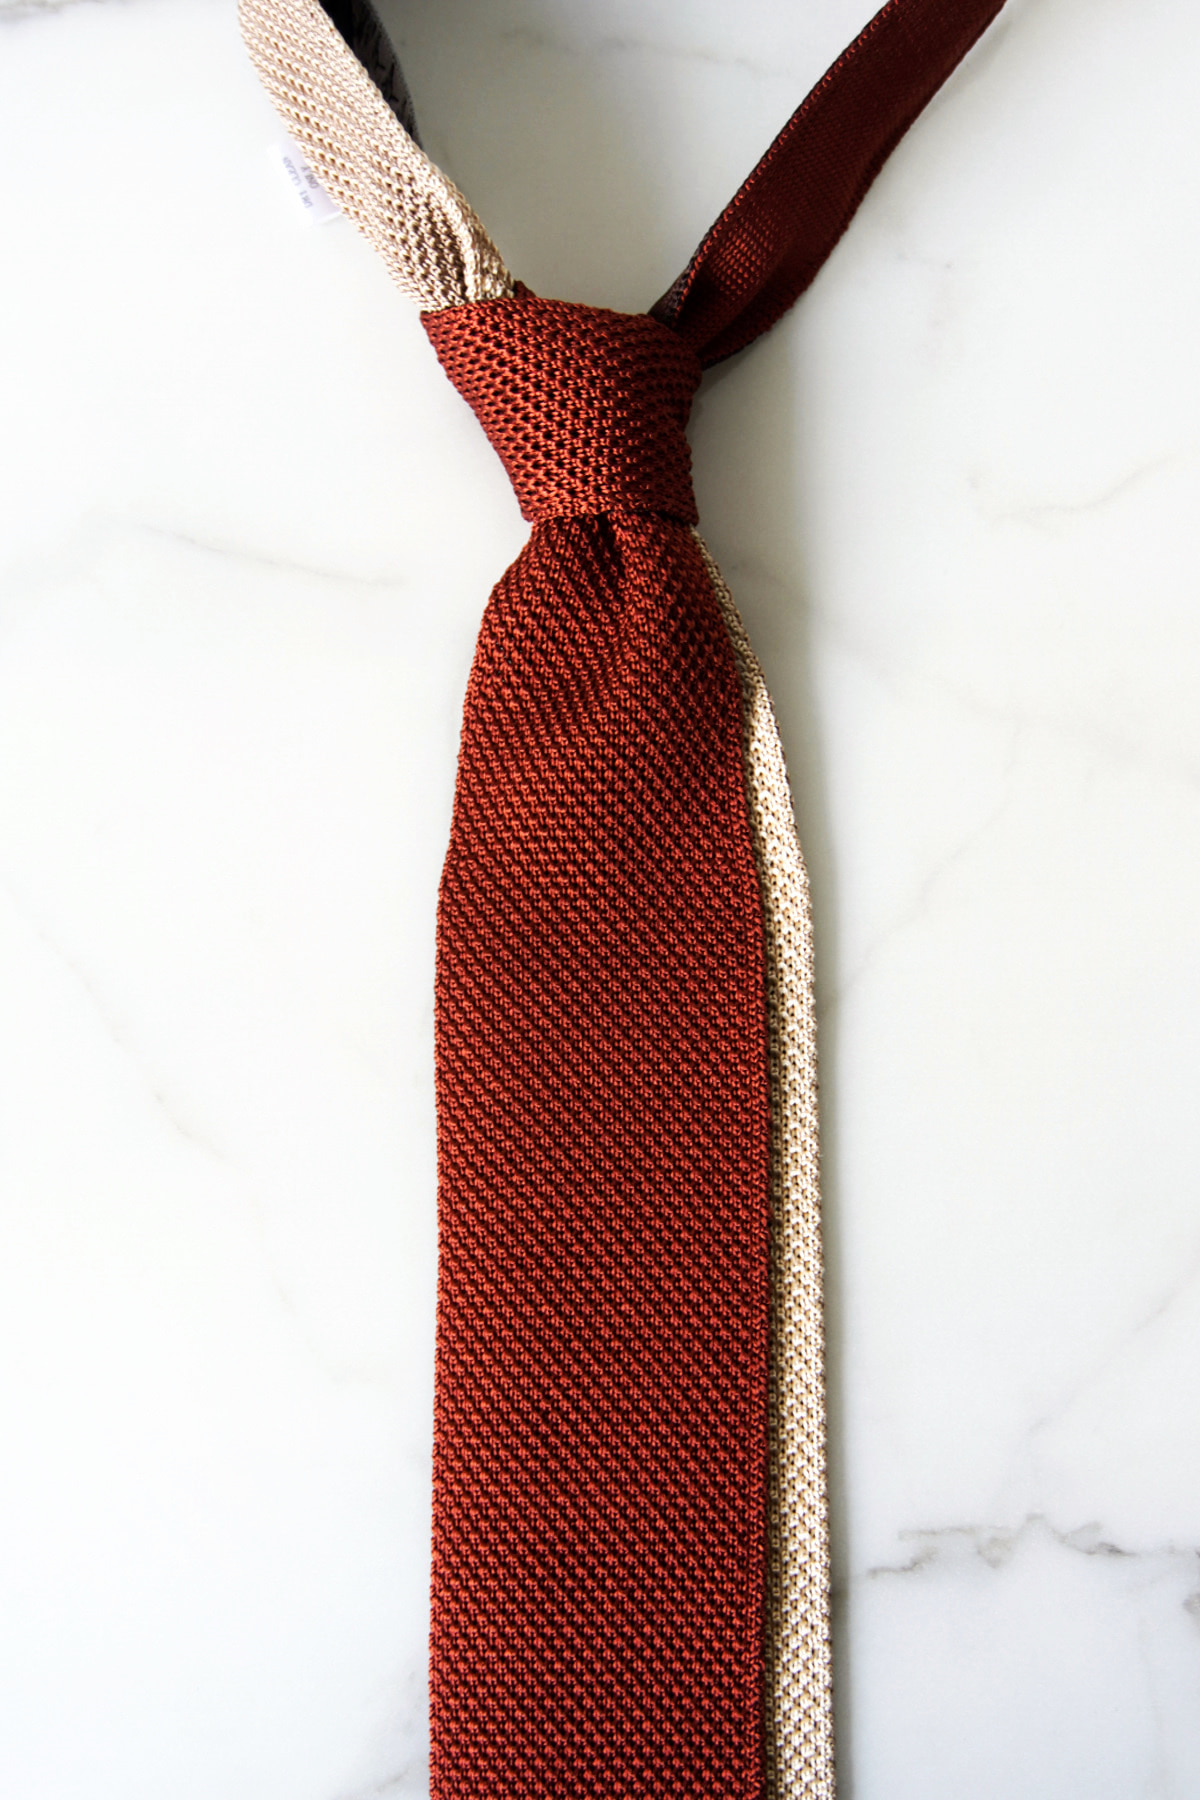 [KENNETH FIELD] 4 Face Silk  Knitted  Solid Tie - Mocca/Brick/Beige/Brown